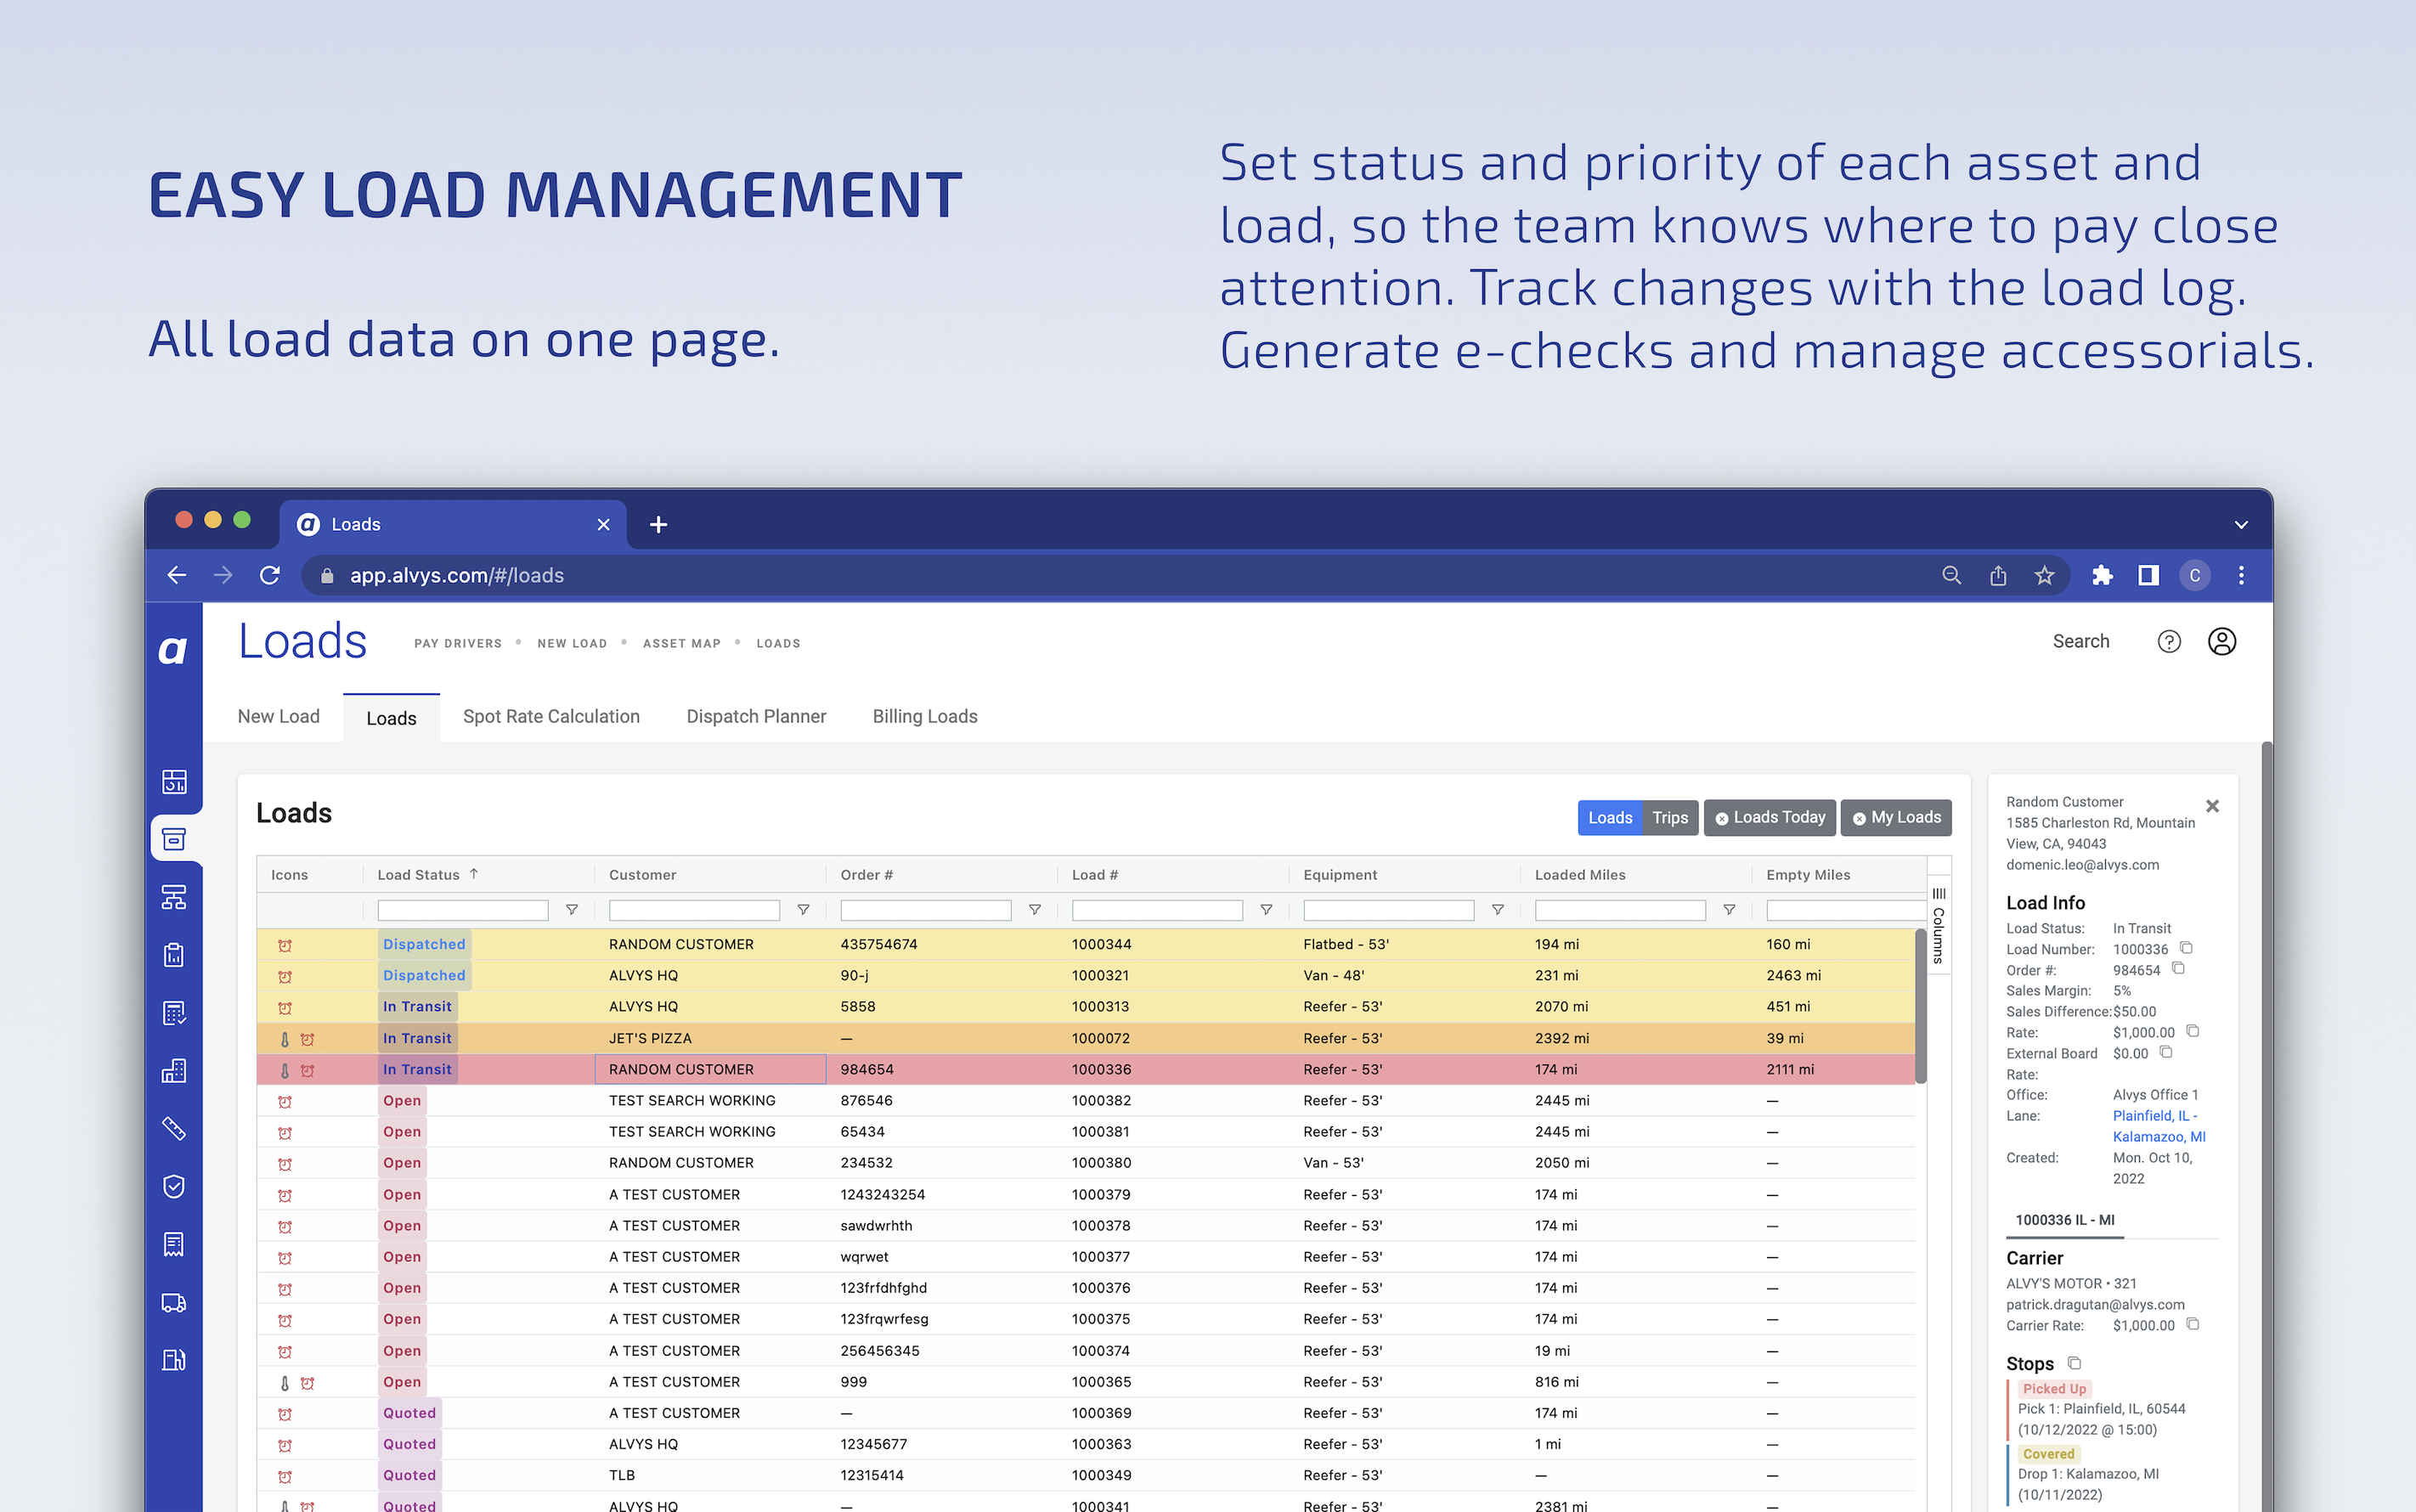 Load Management. All load data on one page. Set status and priority of each asset and load, so the team knows where to pay close attention. Track changes with the load log. Generate e-checks and manage accessorials.